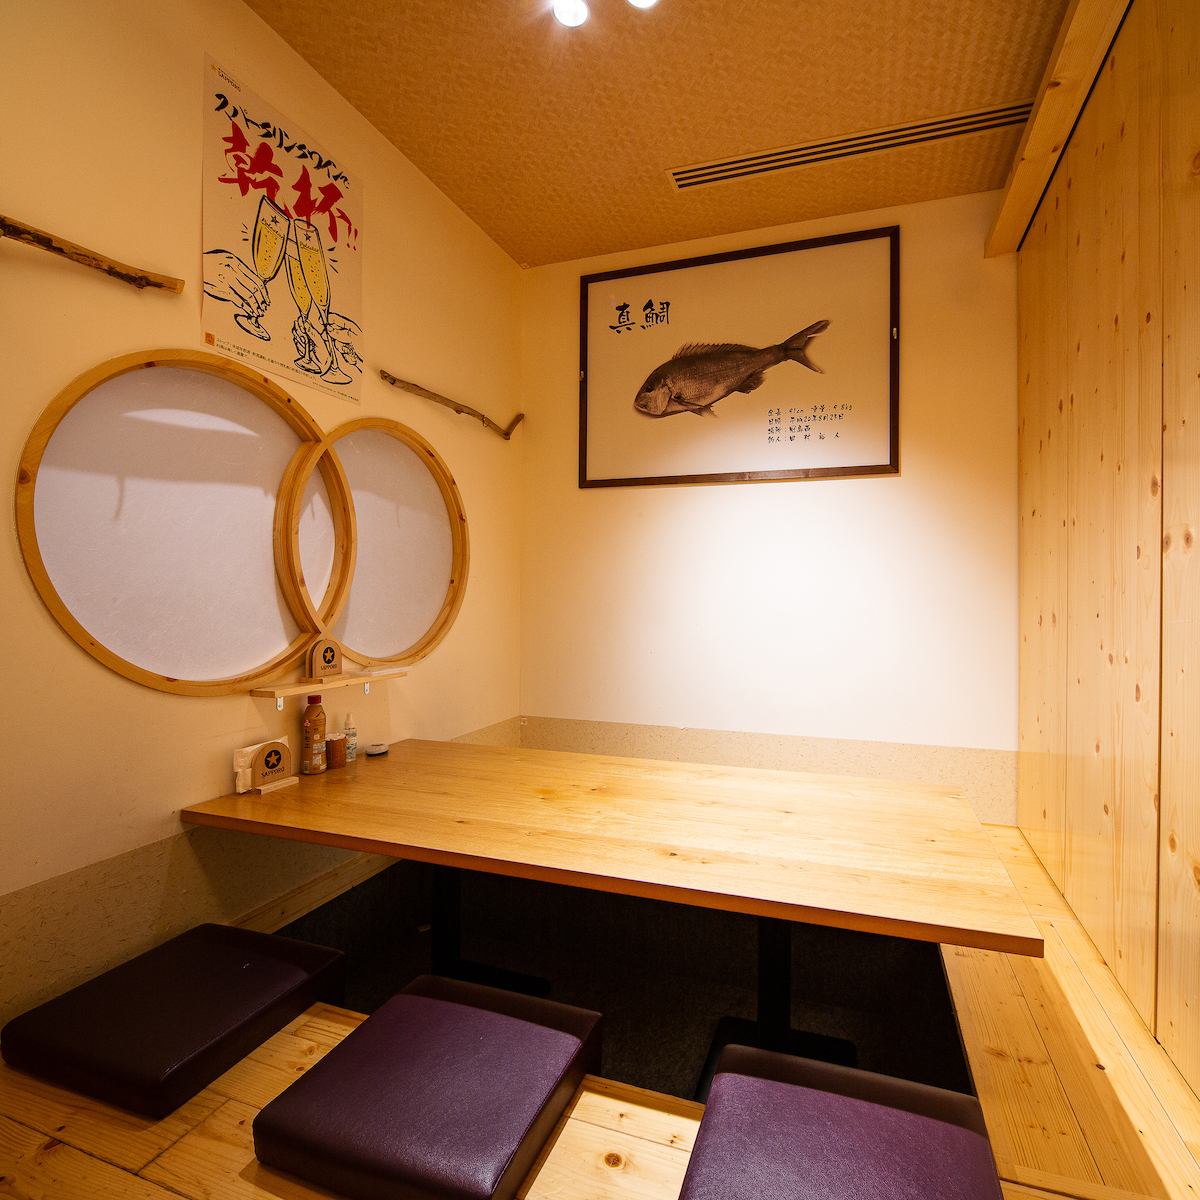 [2 people up to 20 people] Many private rooms with sunken kotatsu according to the number of people